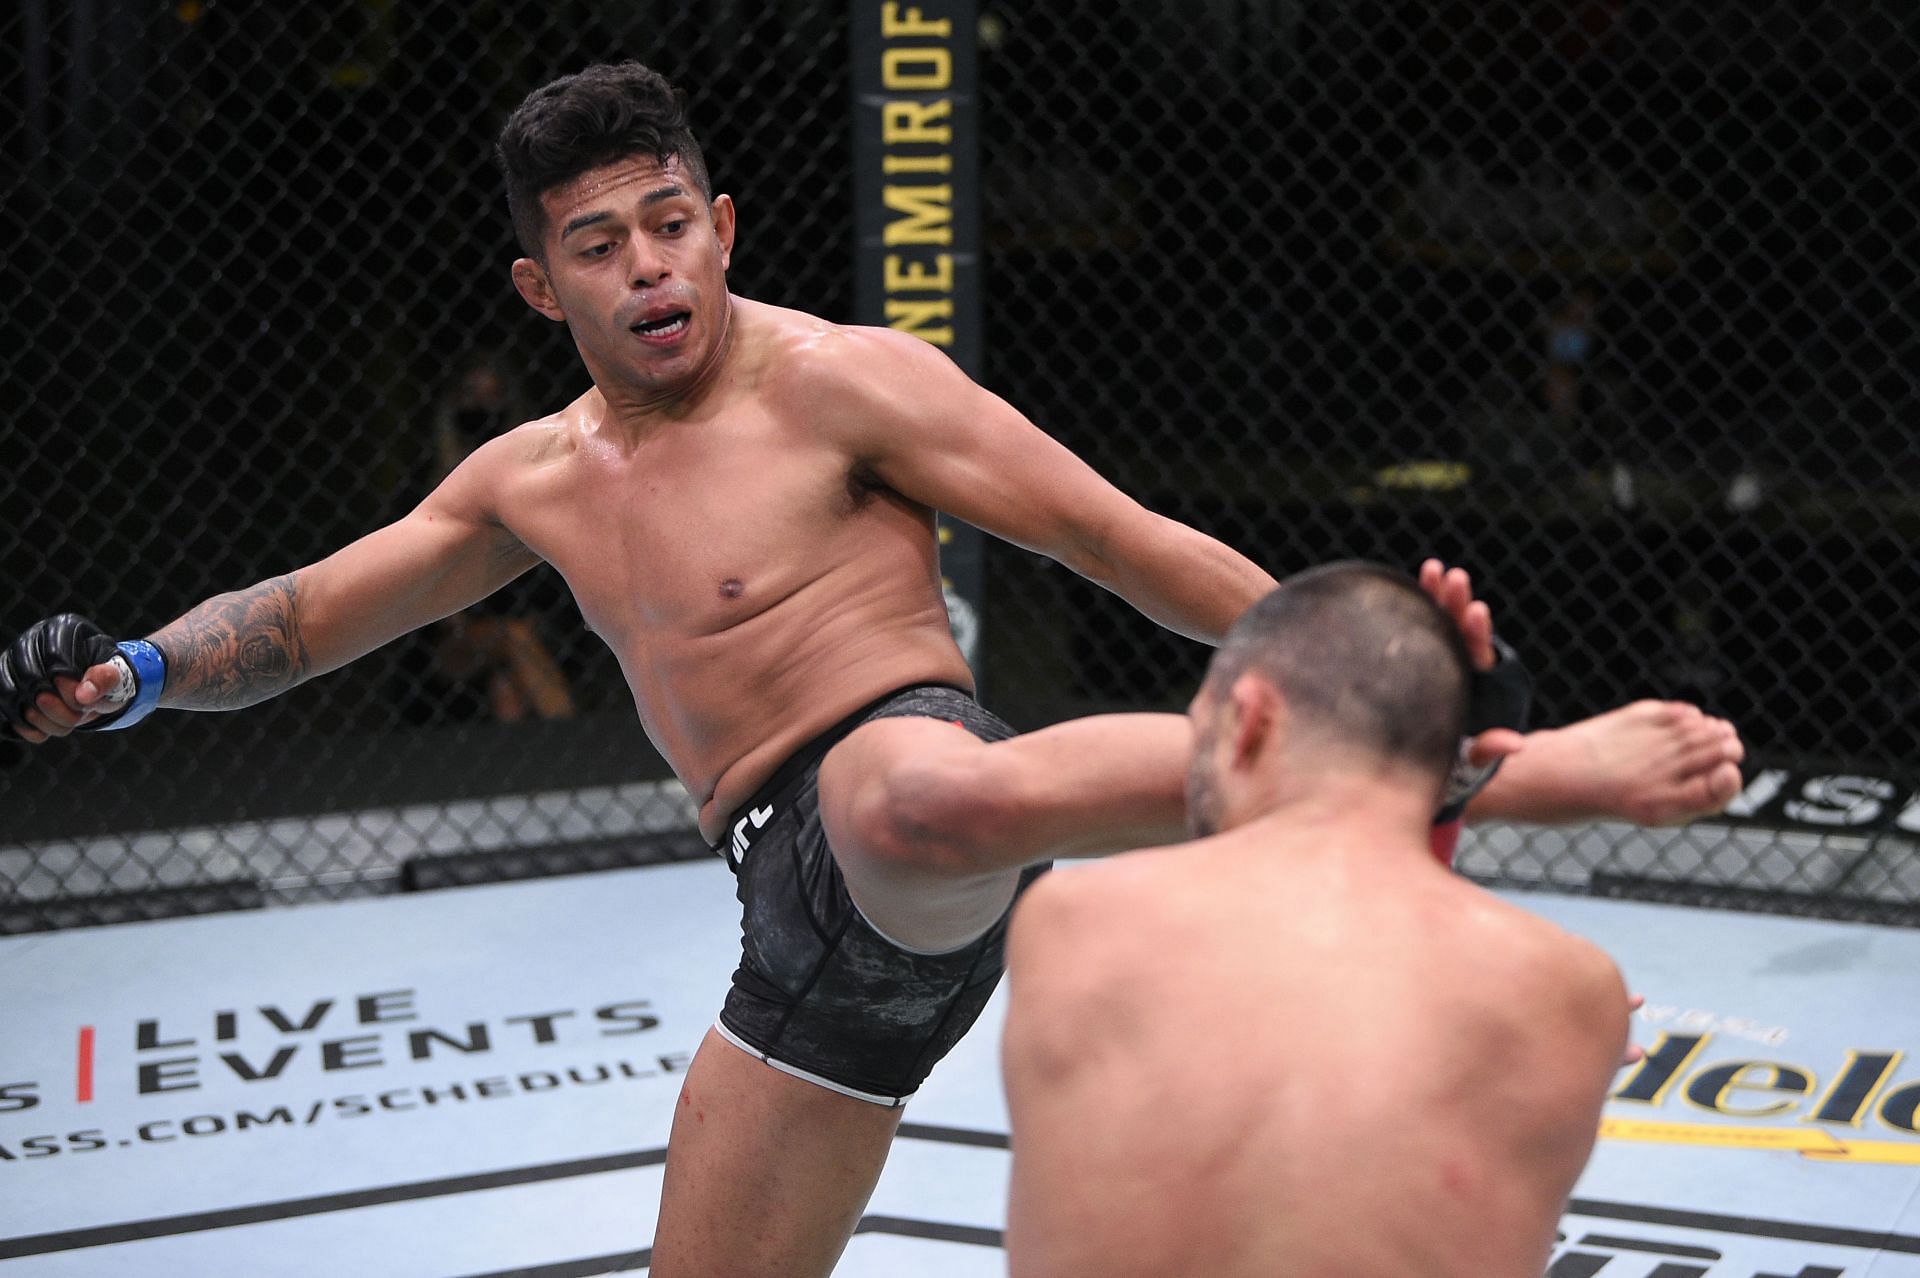 Jonathan Martinez pulled off an upset win over the favoured Said Nurmagomedov